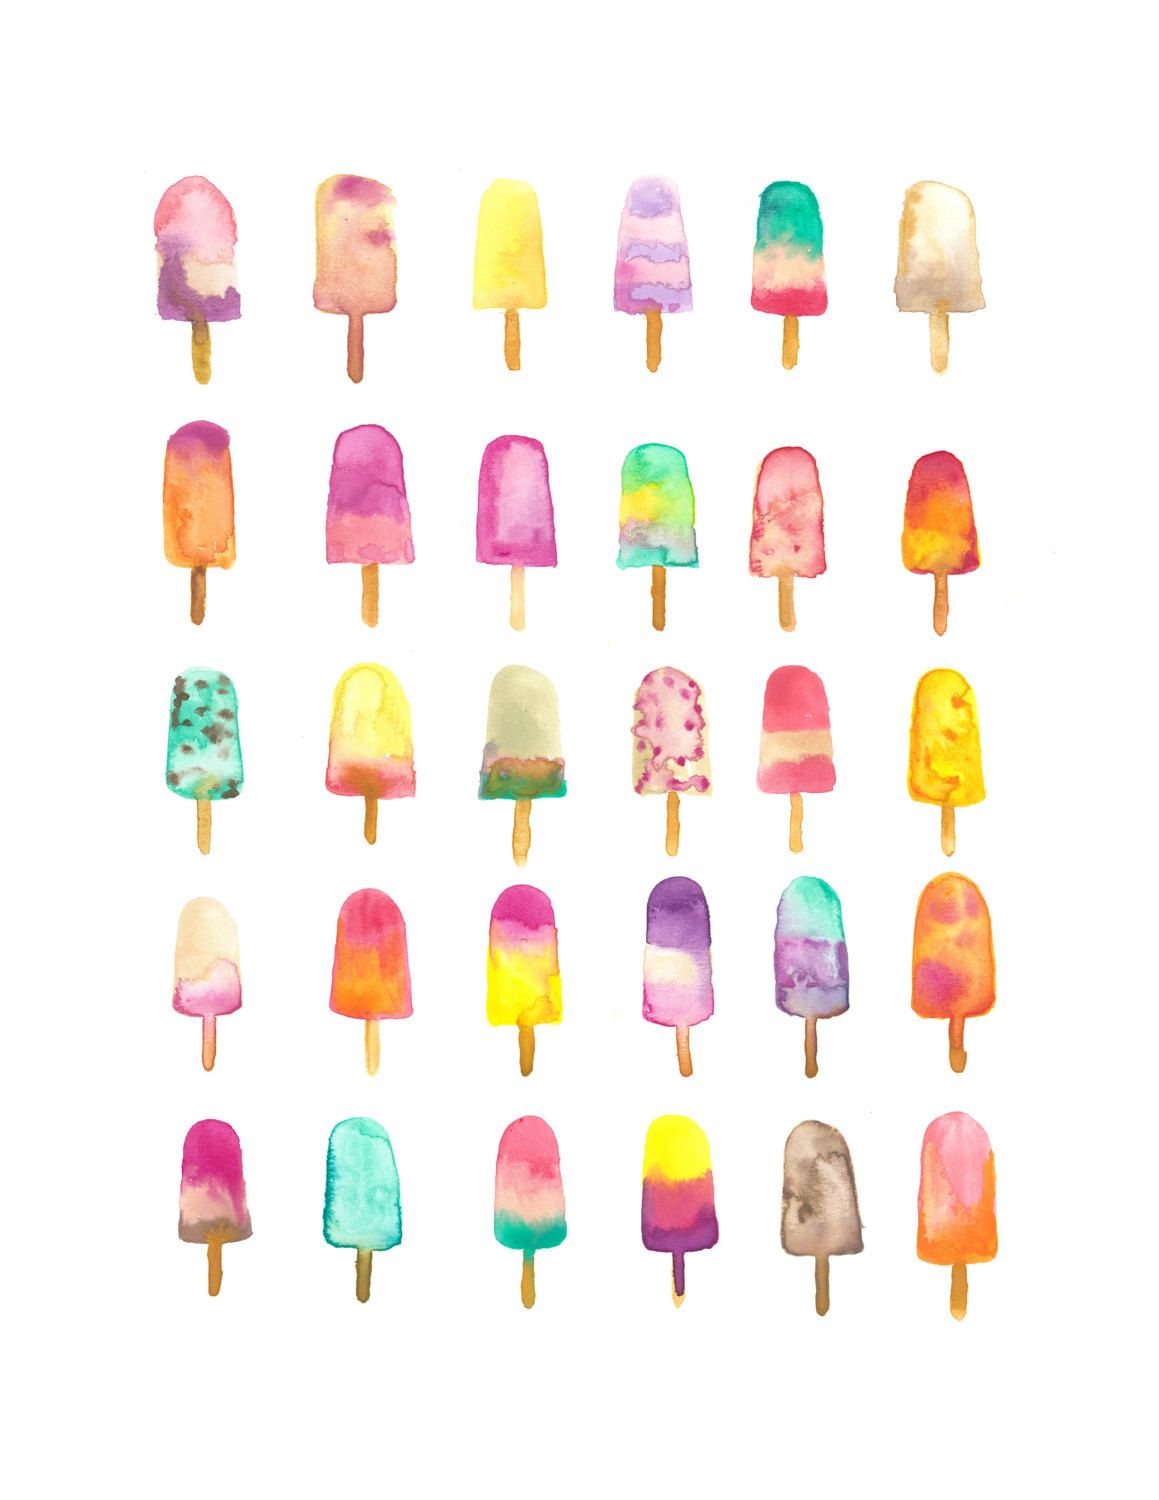 popsicle wallpaper,product,text,pink,yellow,clip art